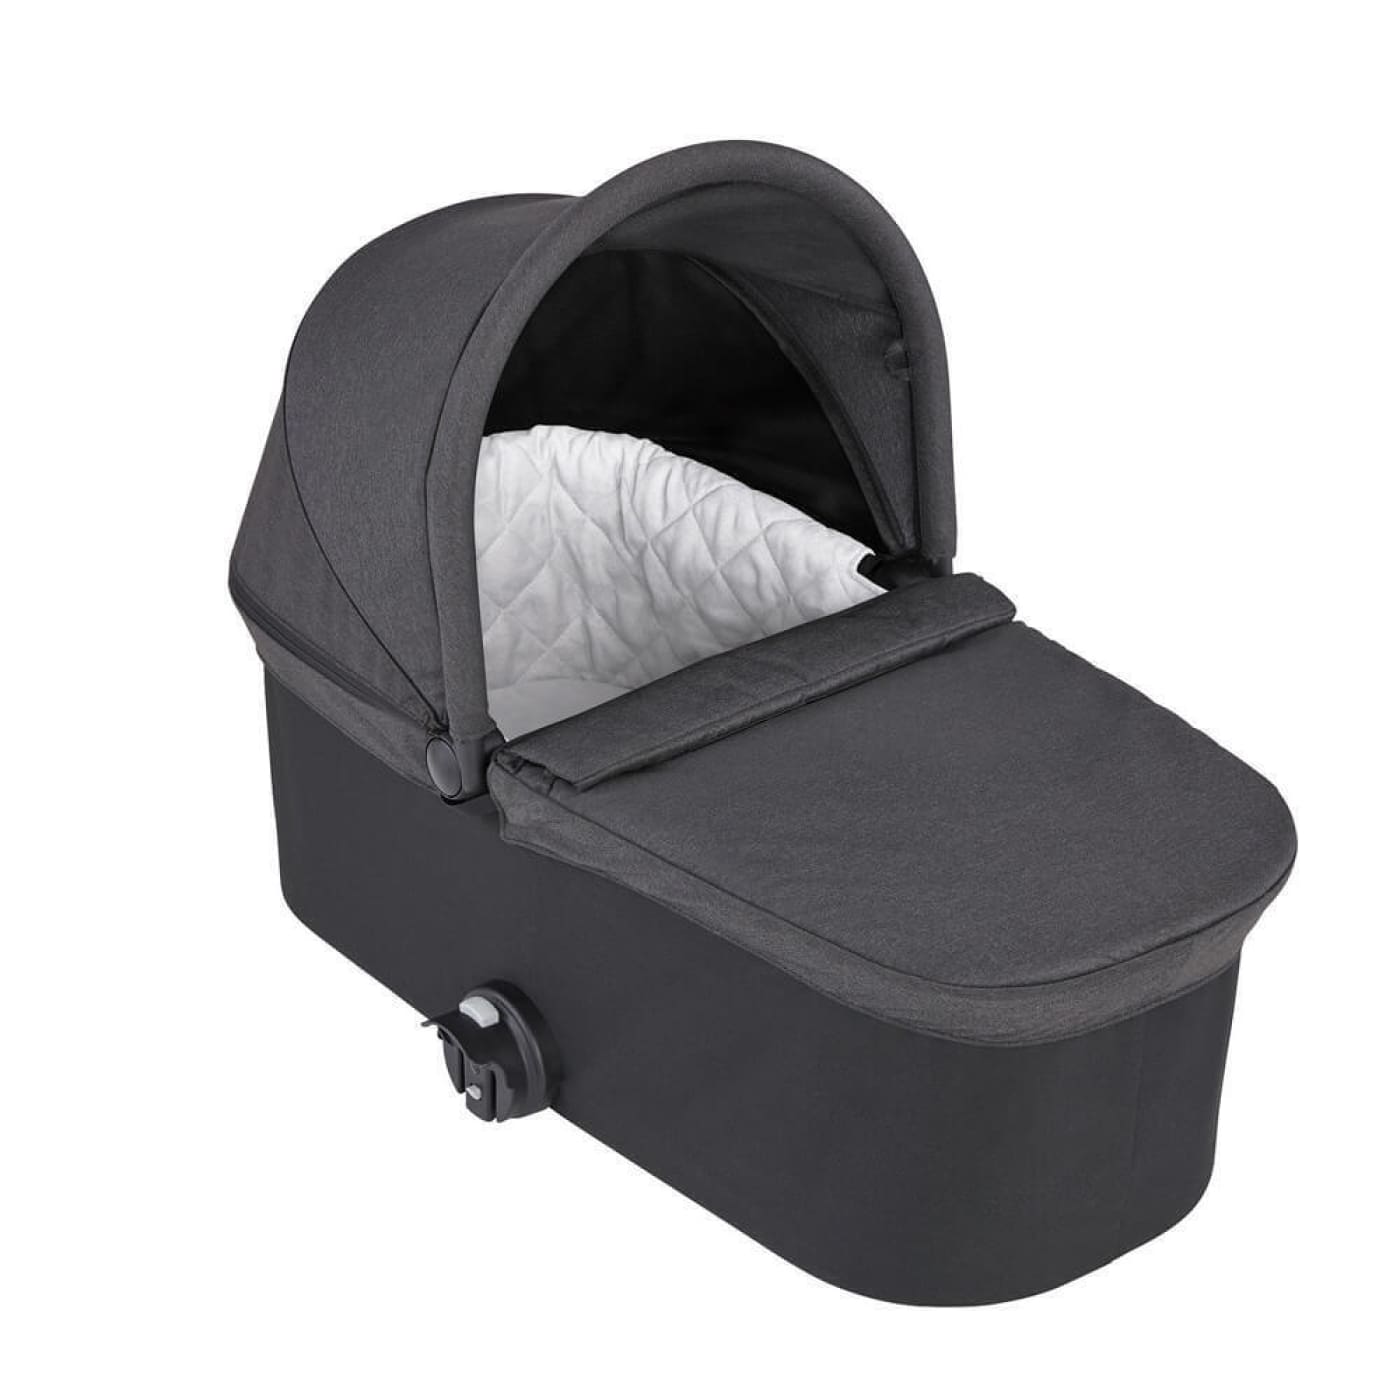 Baby Jogger Deluxe Bassinet - Jet - Jet - PRAMS & STROLLERS - BASS/CARRY COTS/STANDS